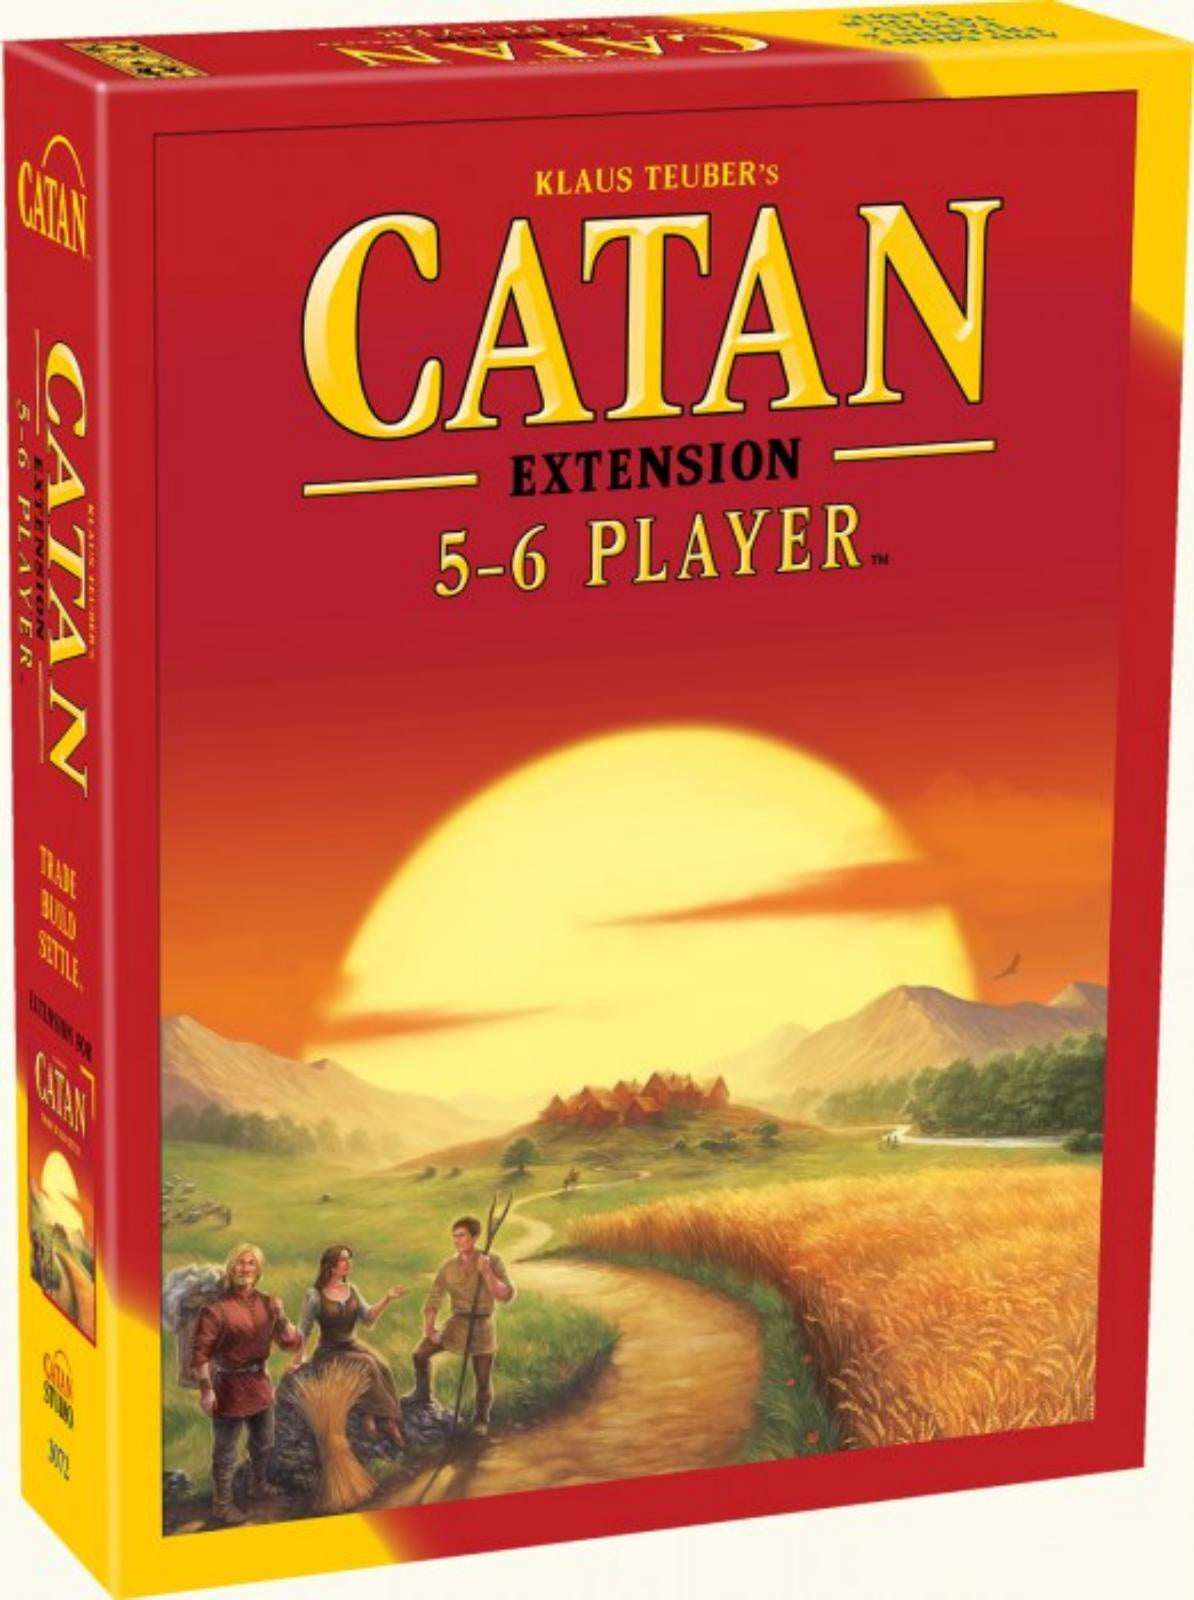 Catan 5 - 6 Player Extension